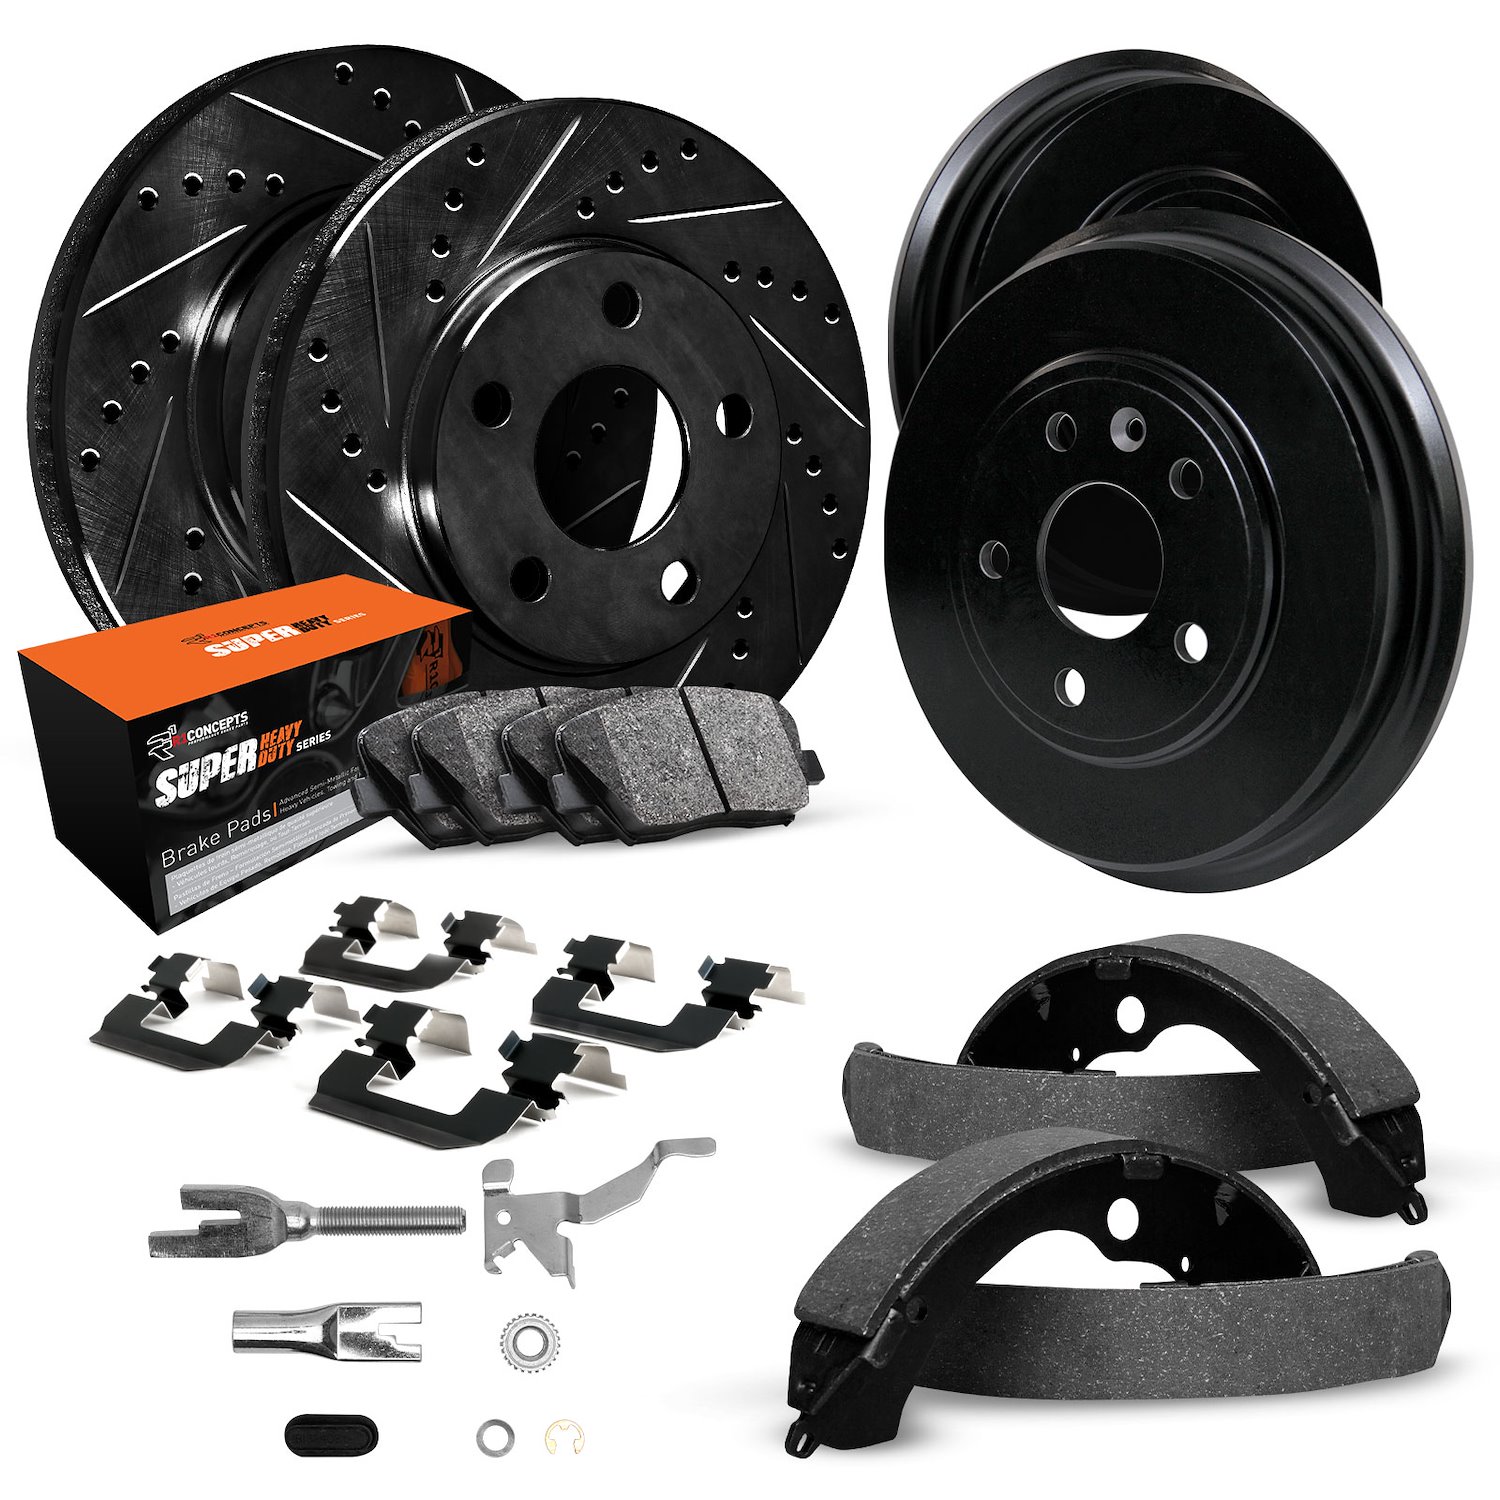 E-Line Drilled/Slotted Black Rotor & Drum Set w/Super-Duty Pads, Shoes, Hardware/Adjusters, 1987-1991 Ford/Lincoln/Mercury/Mazda